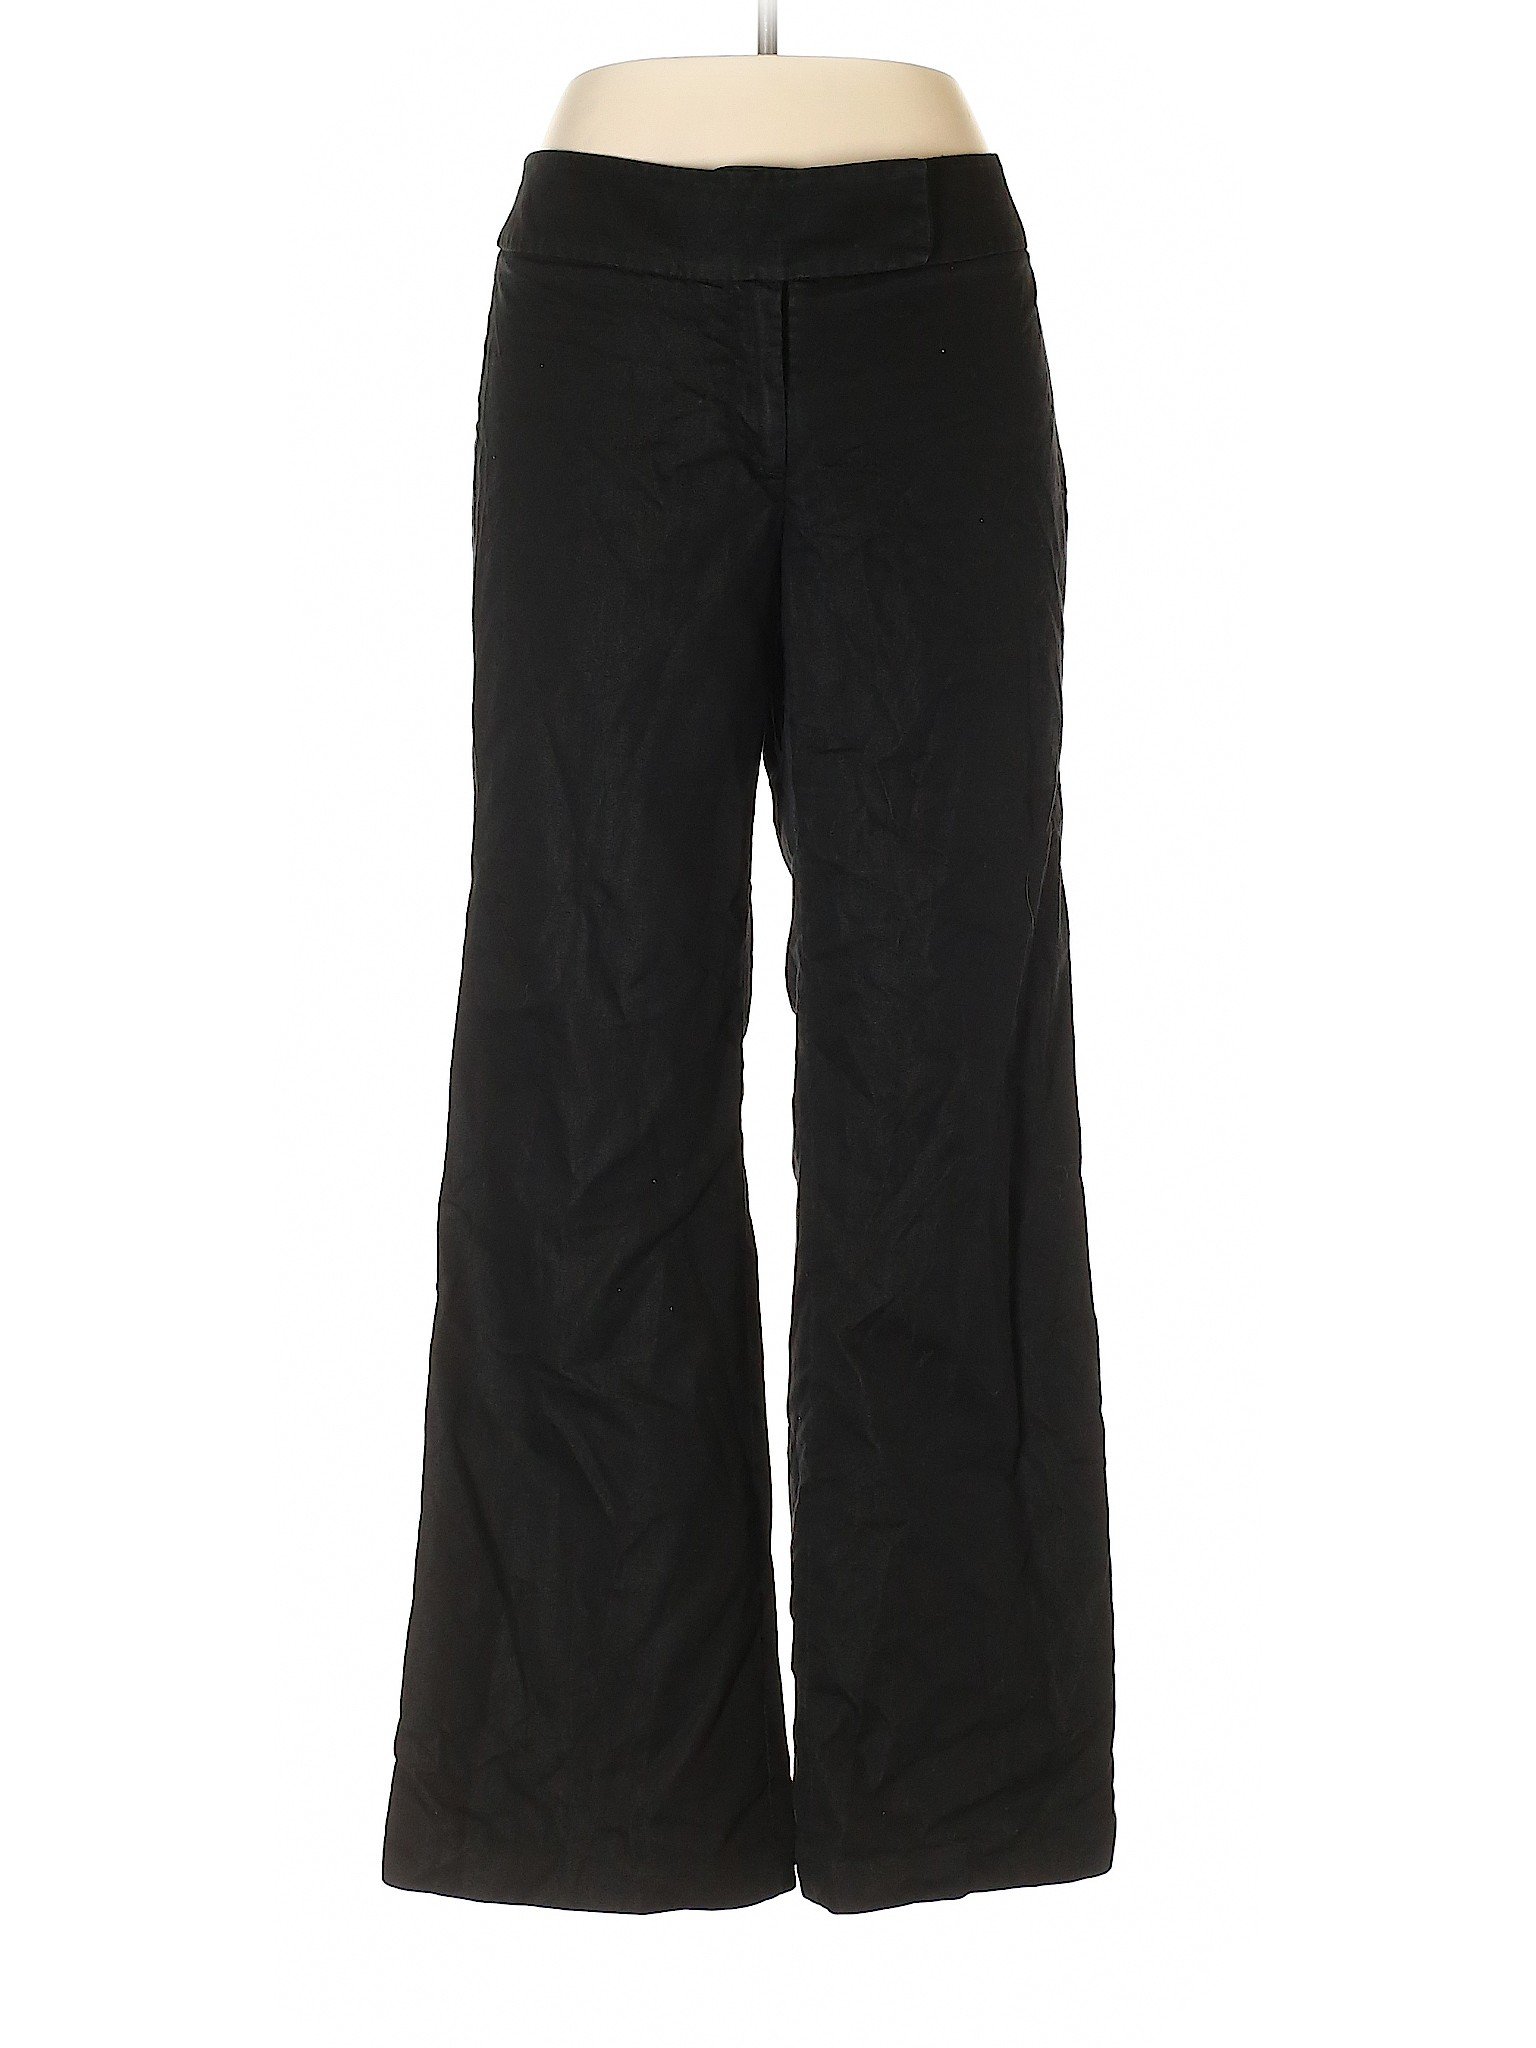 Dalia Collection Solid Black Casual Pants Size 10 - 86% off | thredUP